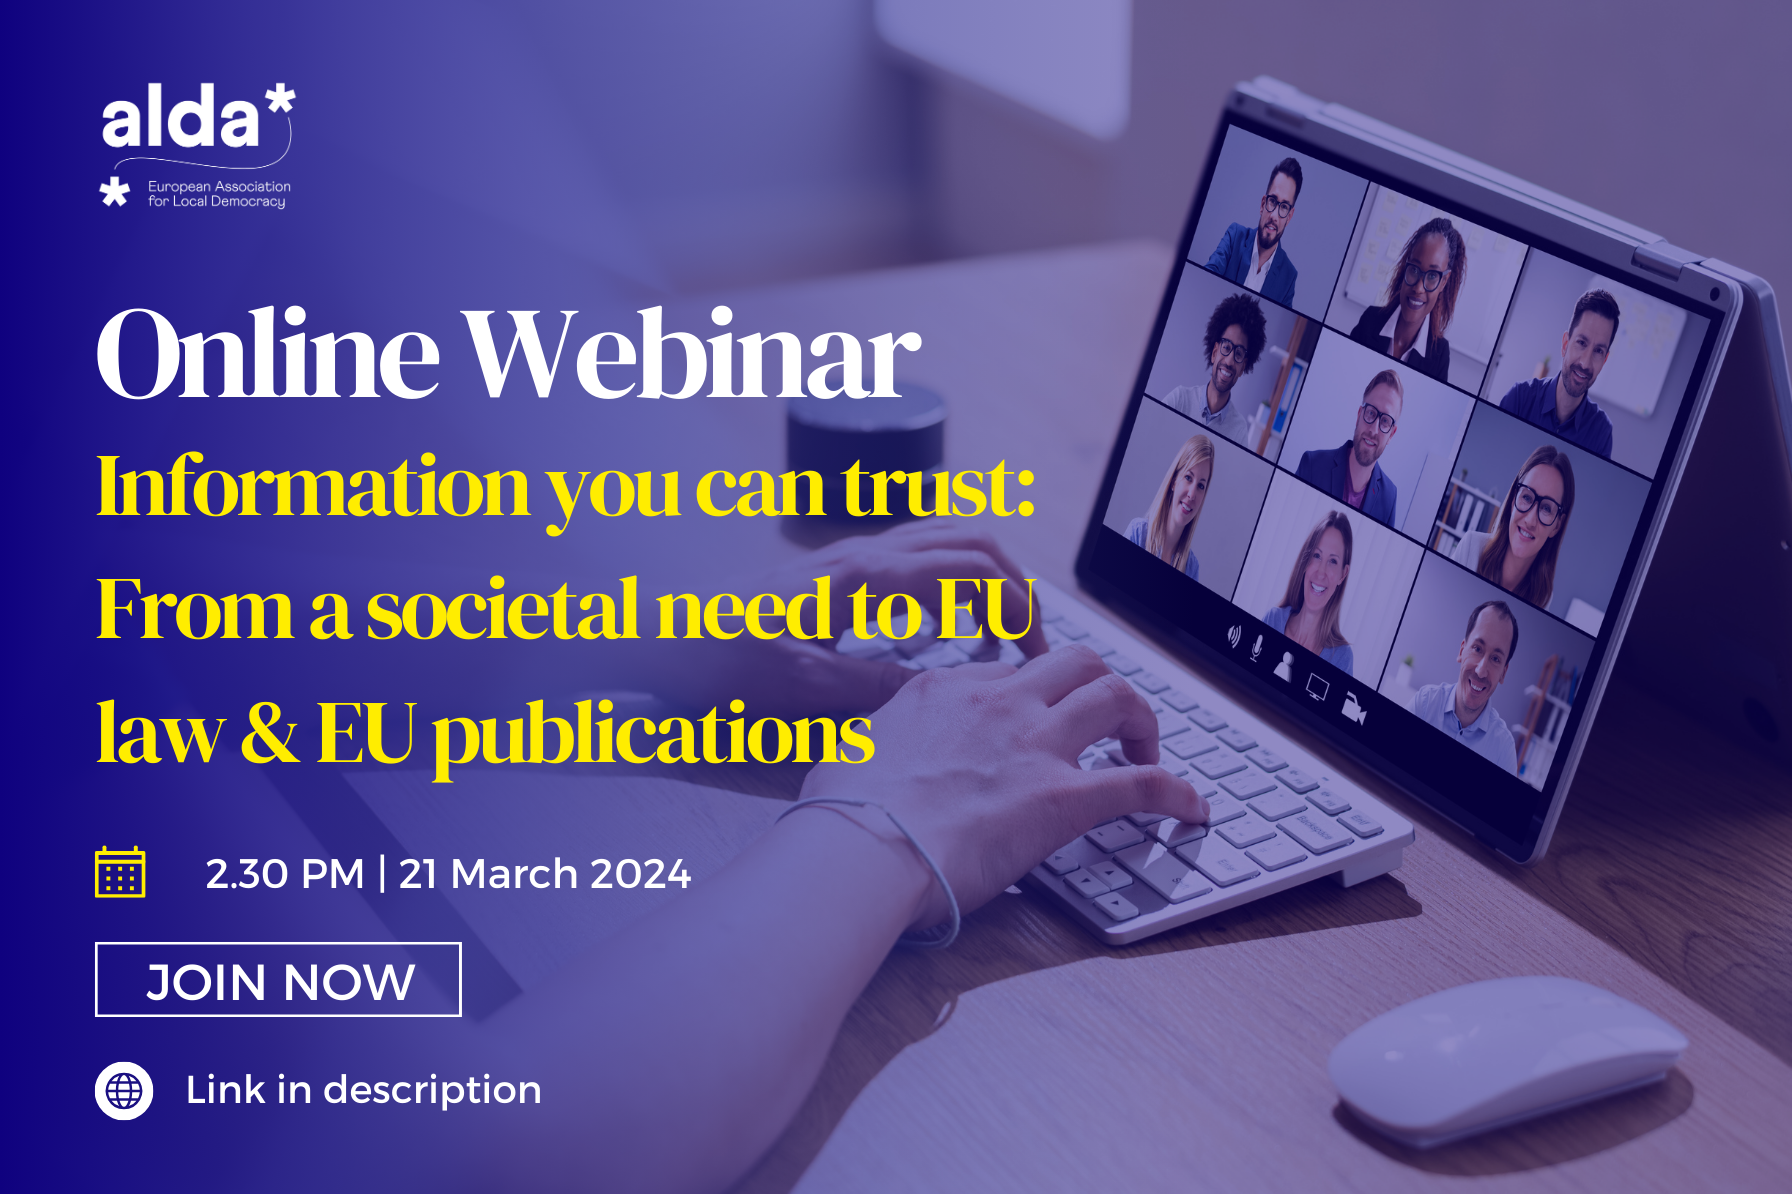 Webinar "Information you can trust: From a societal need to EU law and EU publications"